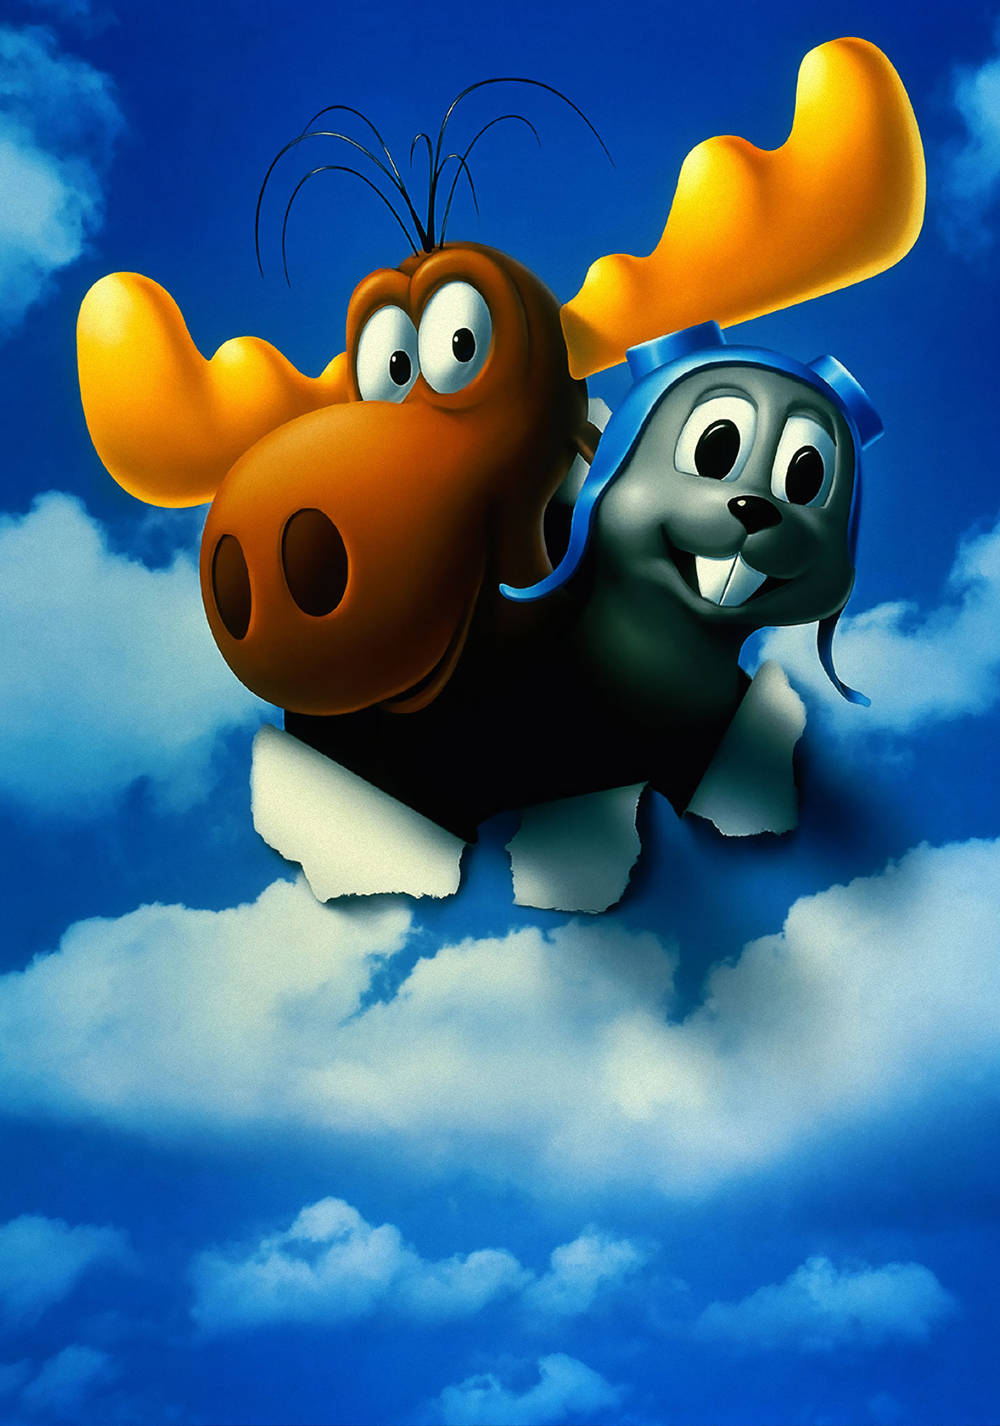 Rocky And Bullwinkle Flying In A Sky